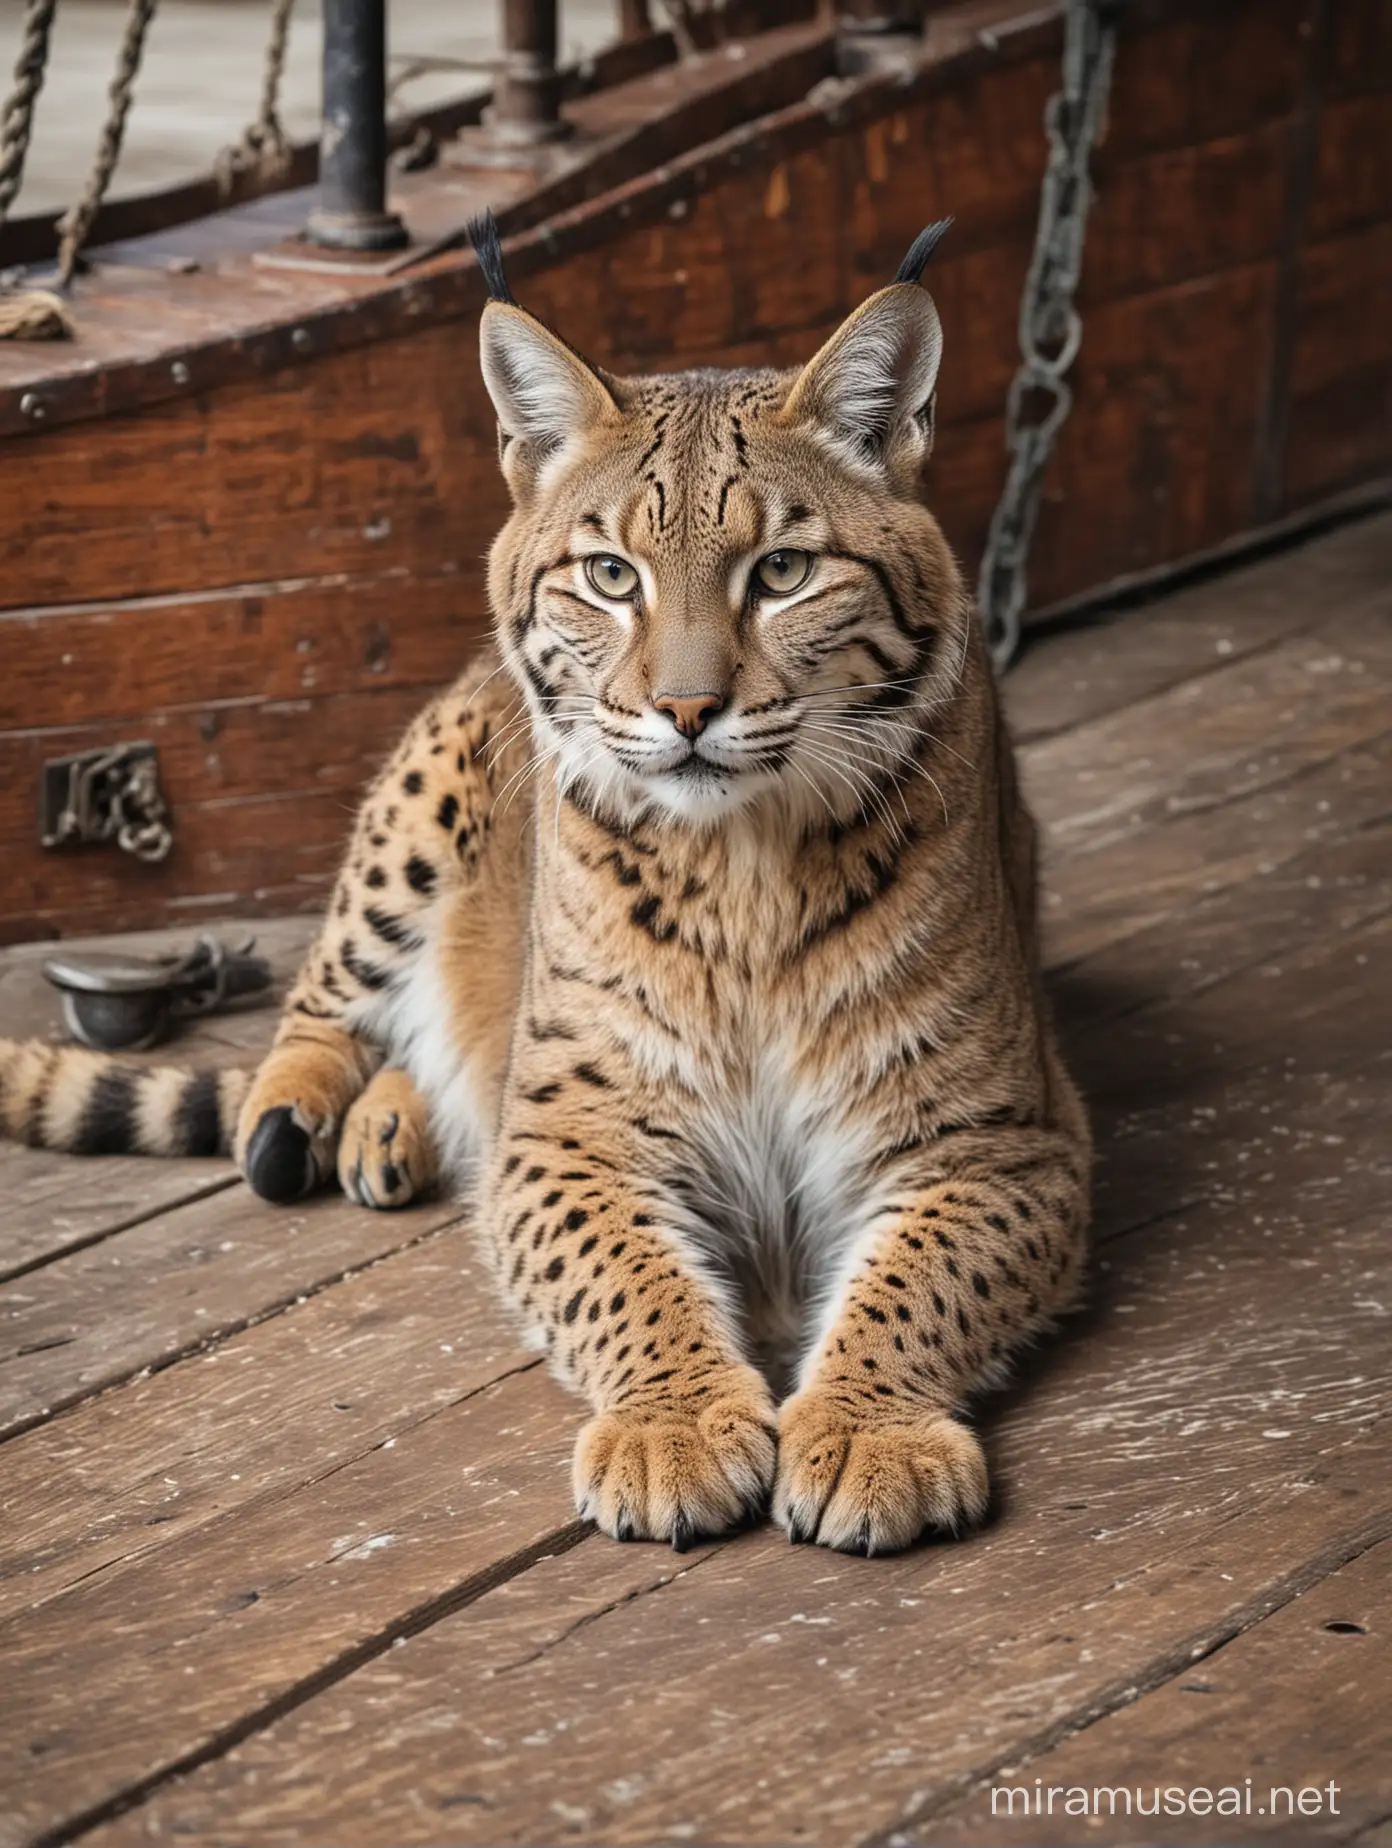 Bobcat, laying on wooden floor, on a pirate ship